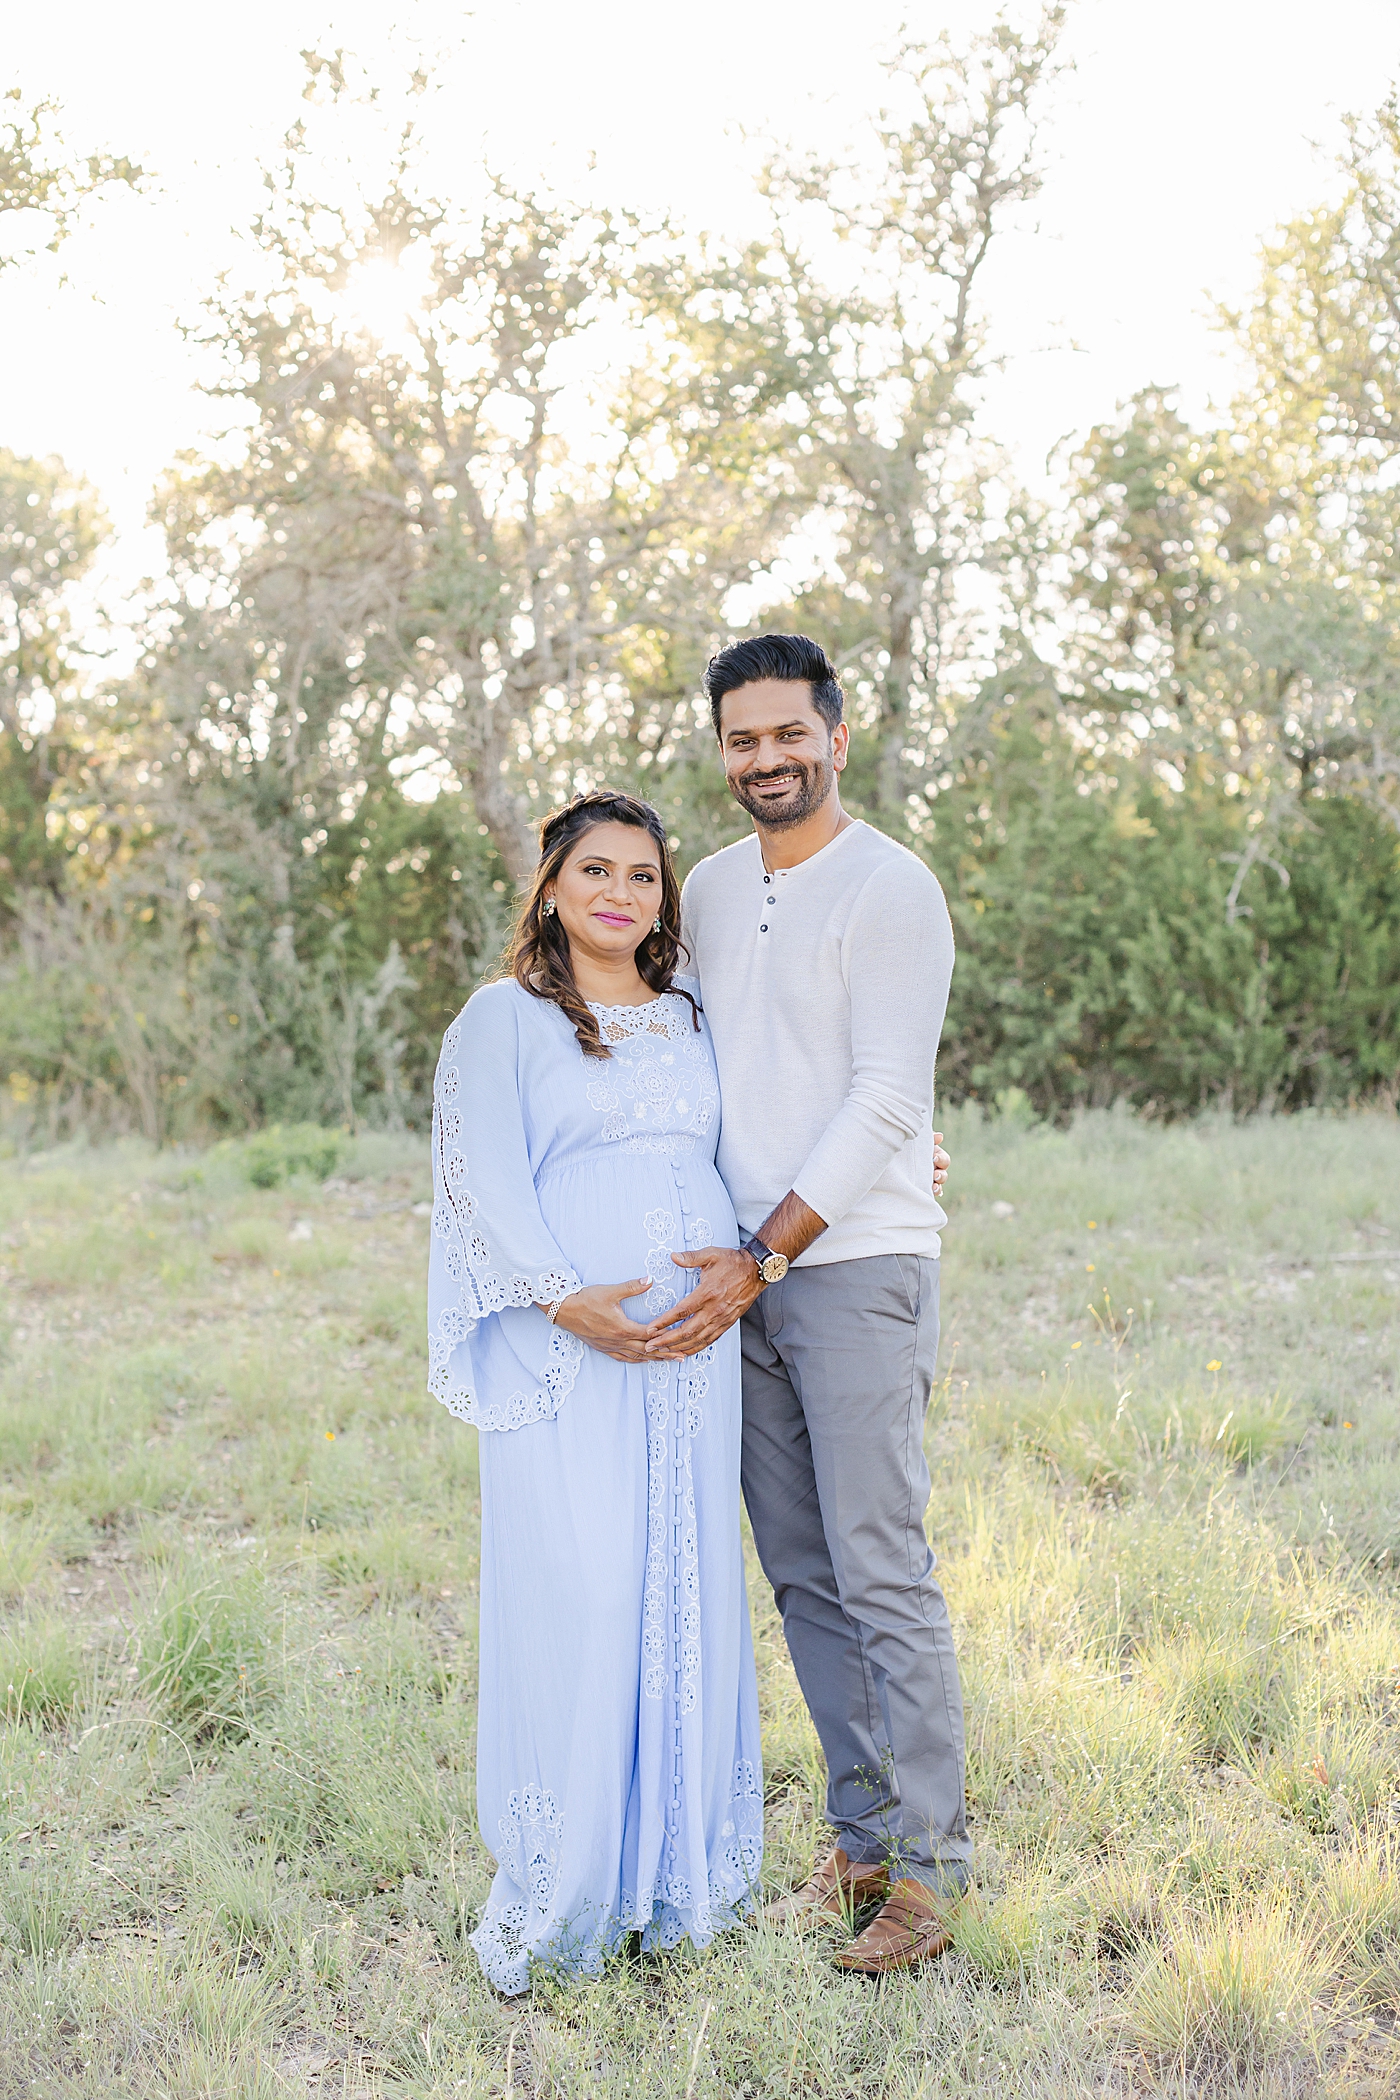 Mom and dad snuggling during their Outdoor Maternity Session in Austin | Photo by Sana Ahmed Photography